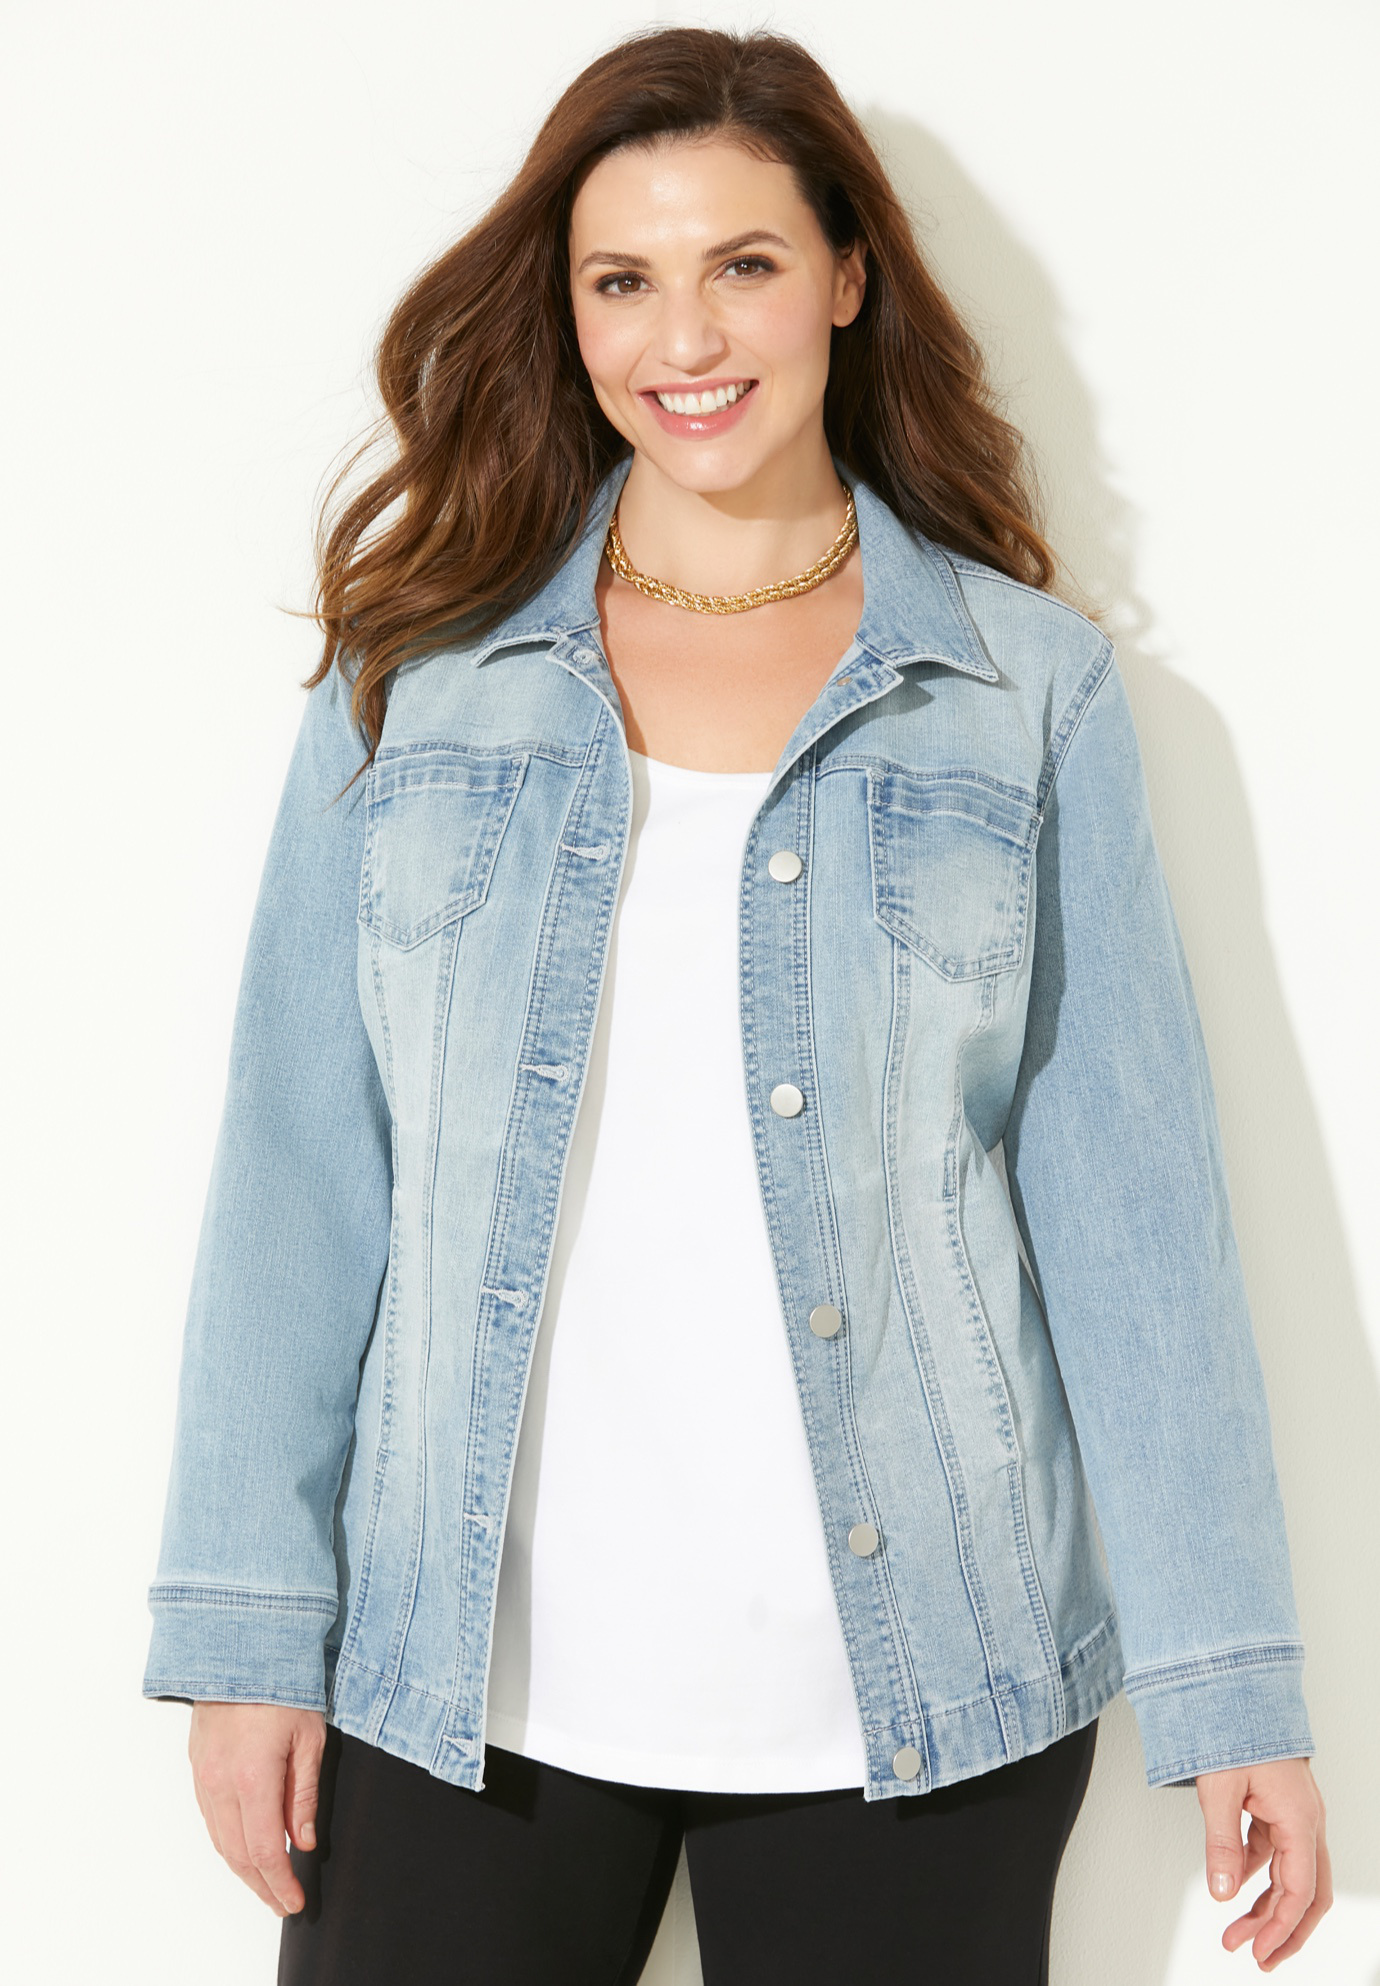 Catherines Women's Plus Size Classic Jean Jacket - image 3 of 4